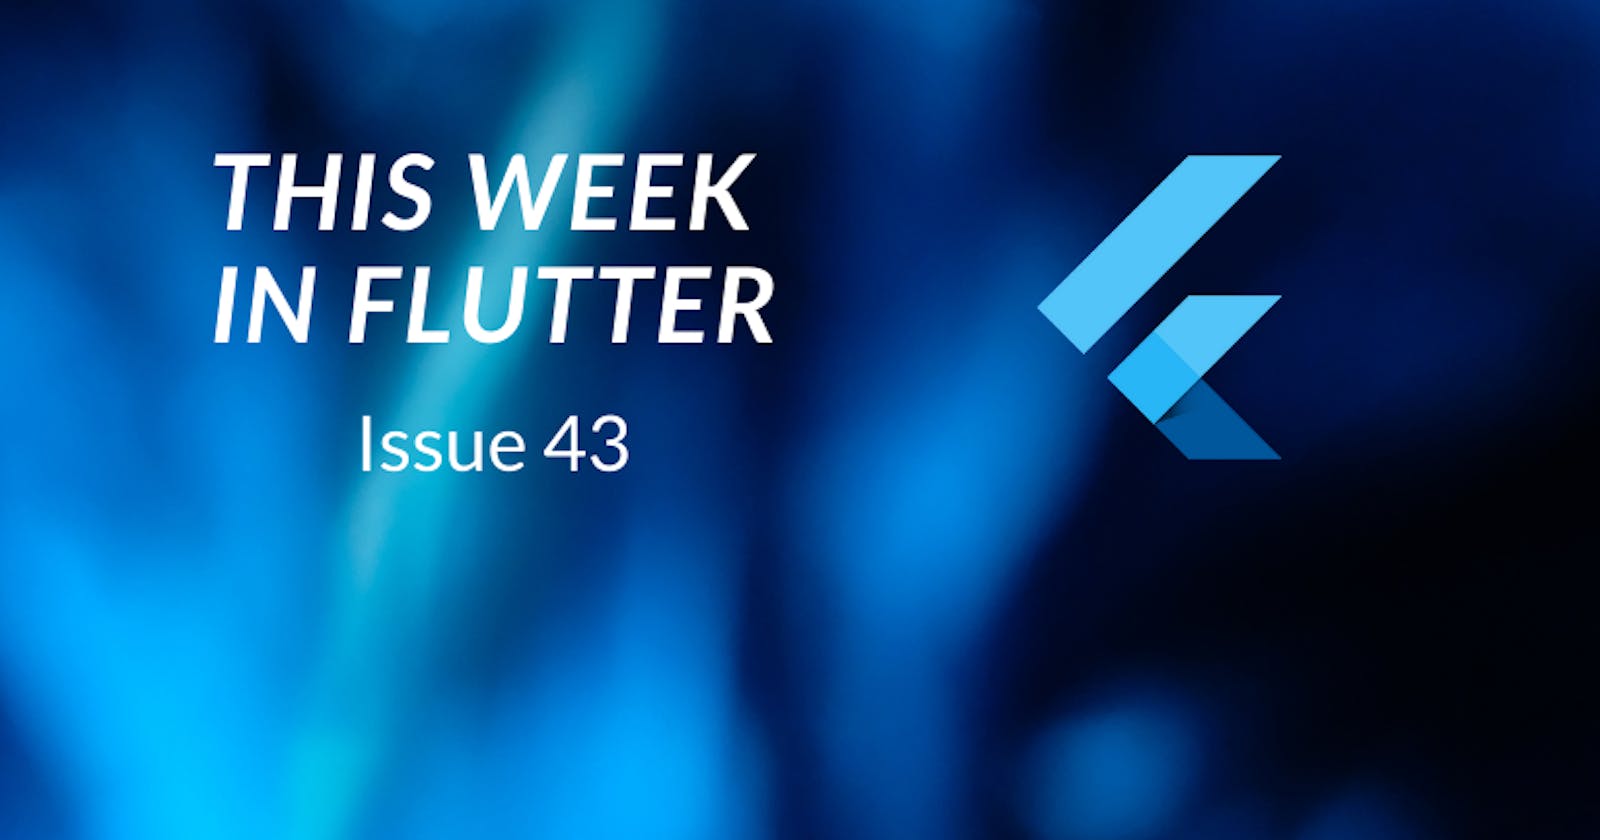 This week in Flutter #43